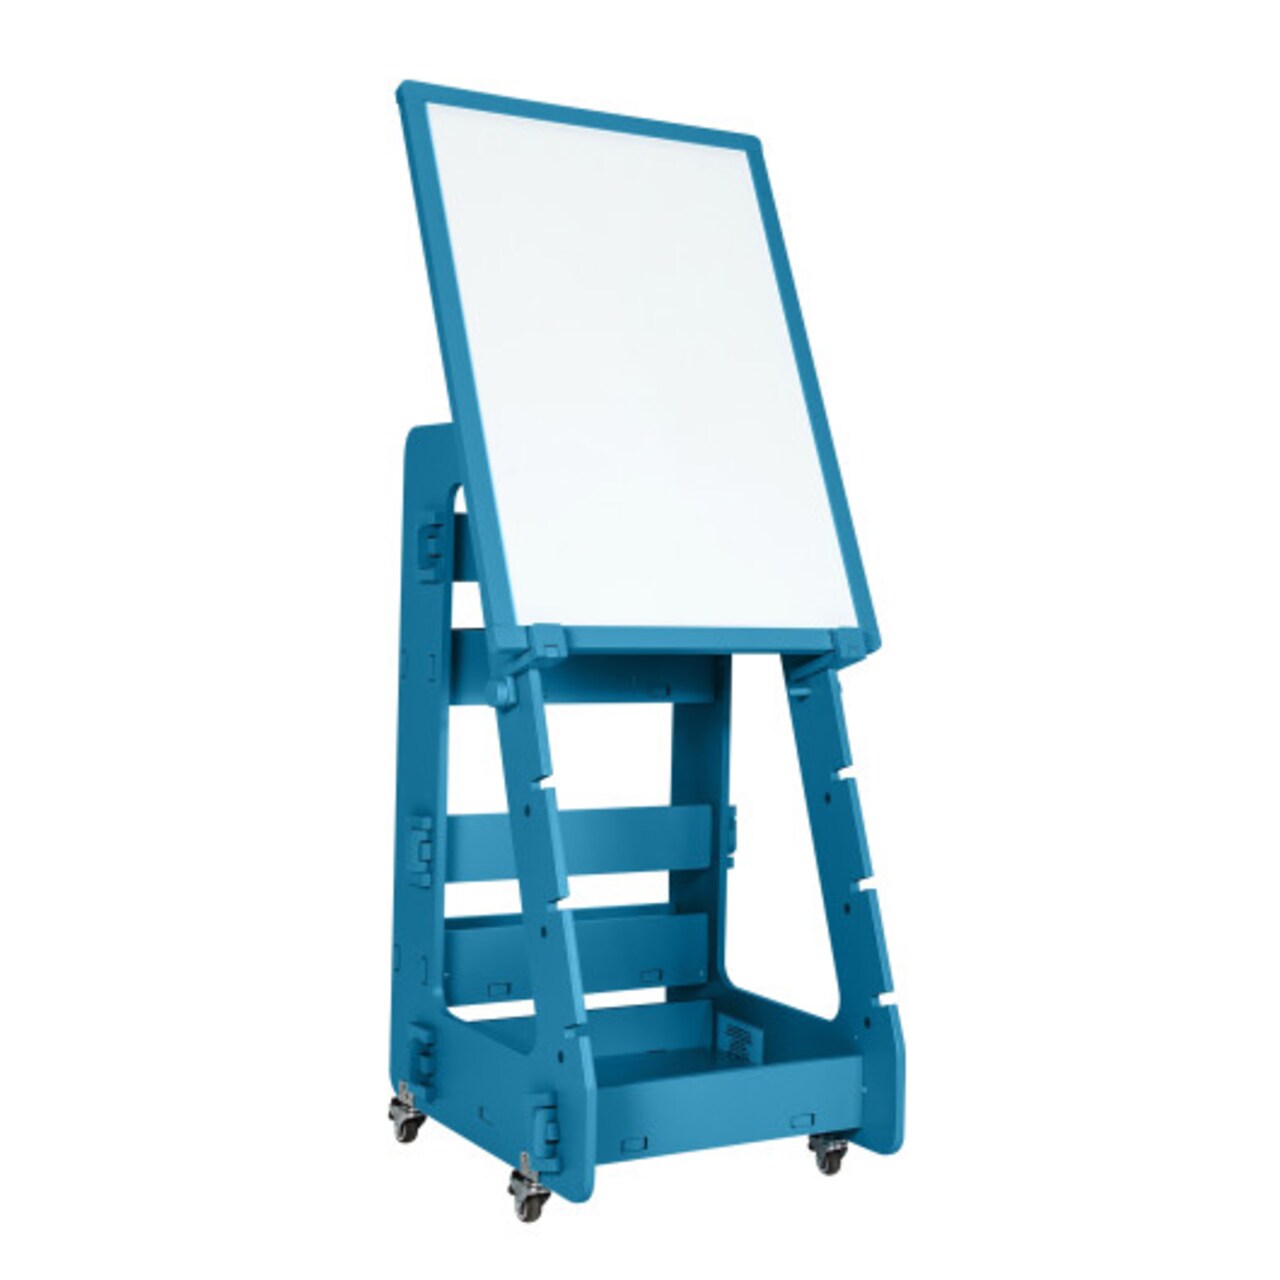 Multi functional Kids' Standing Art Easel with Dry-Erase Board